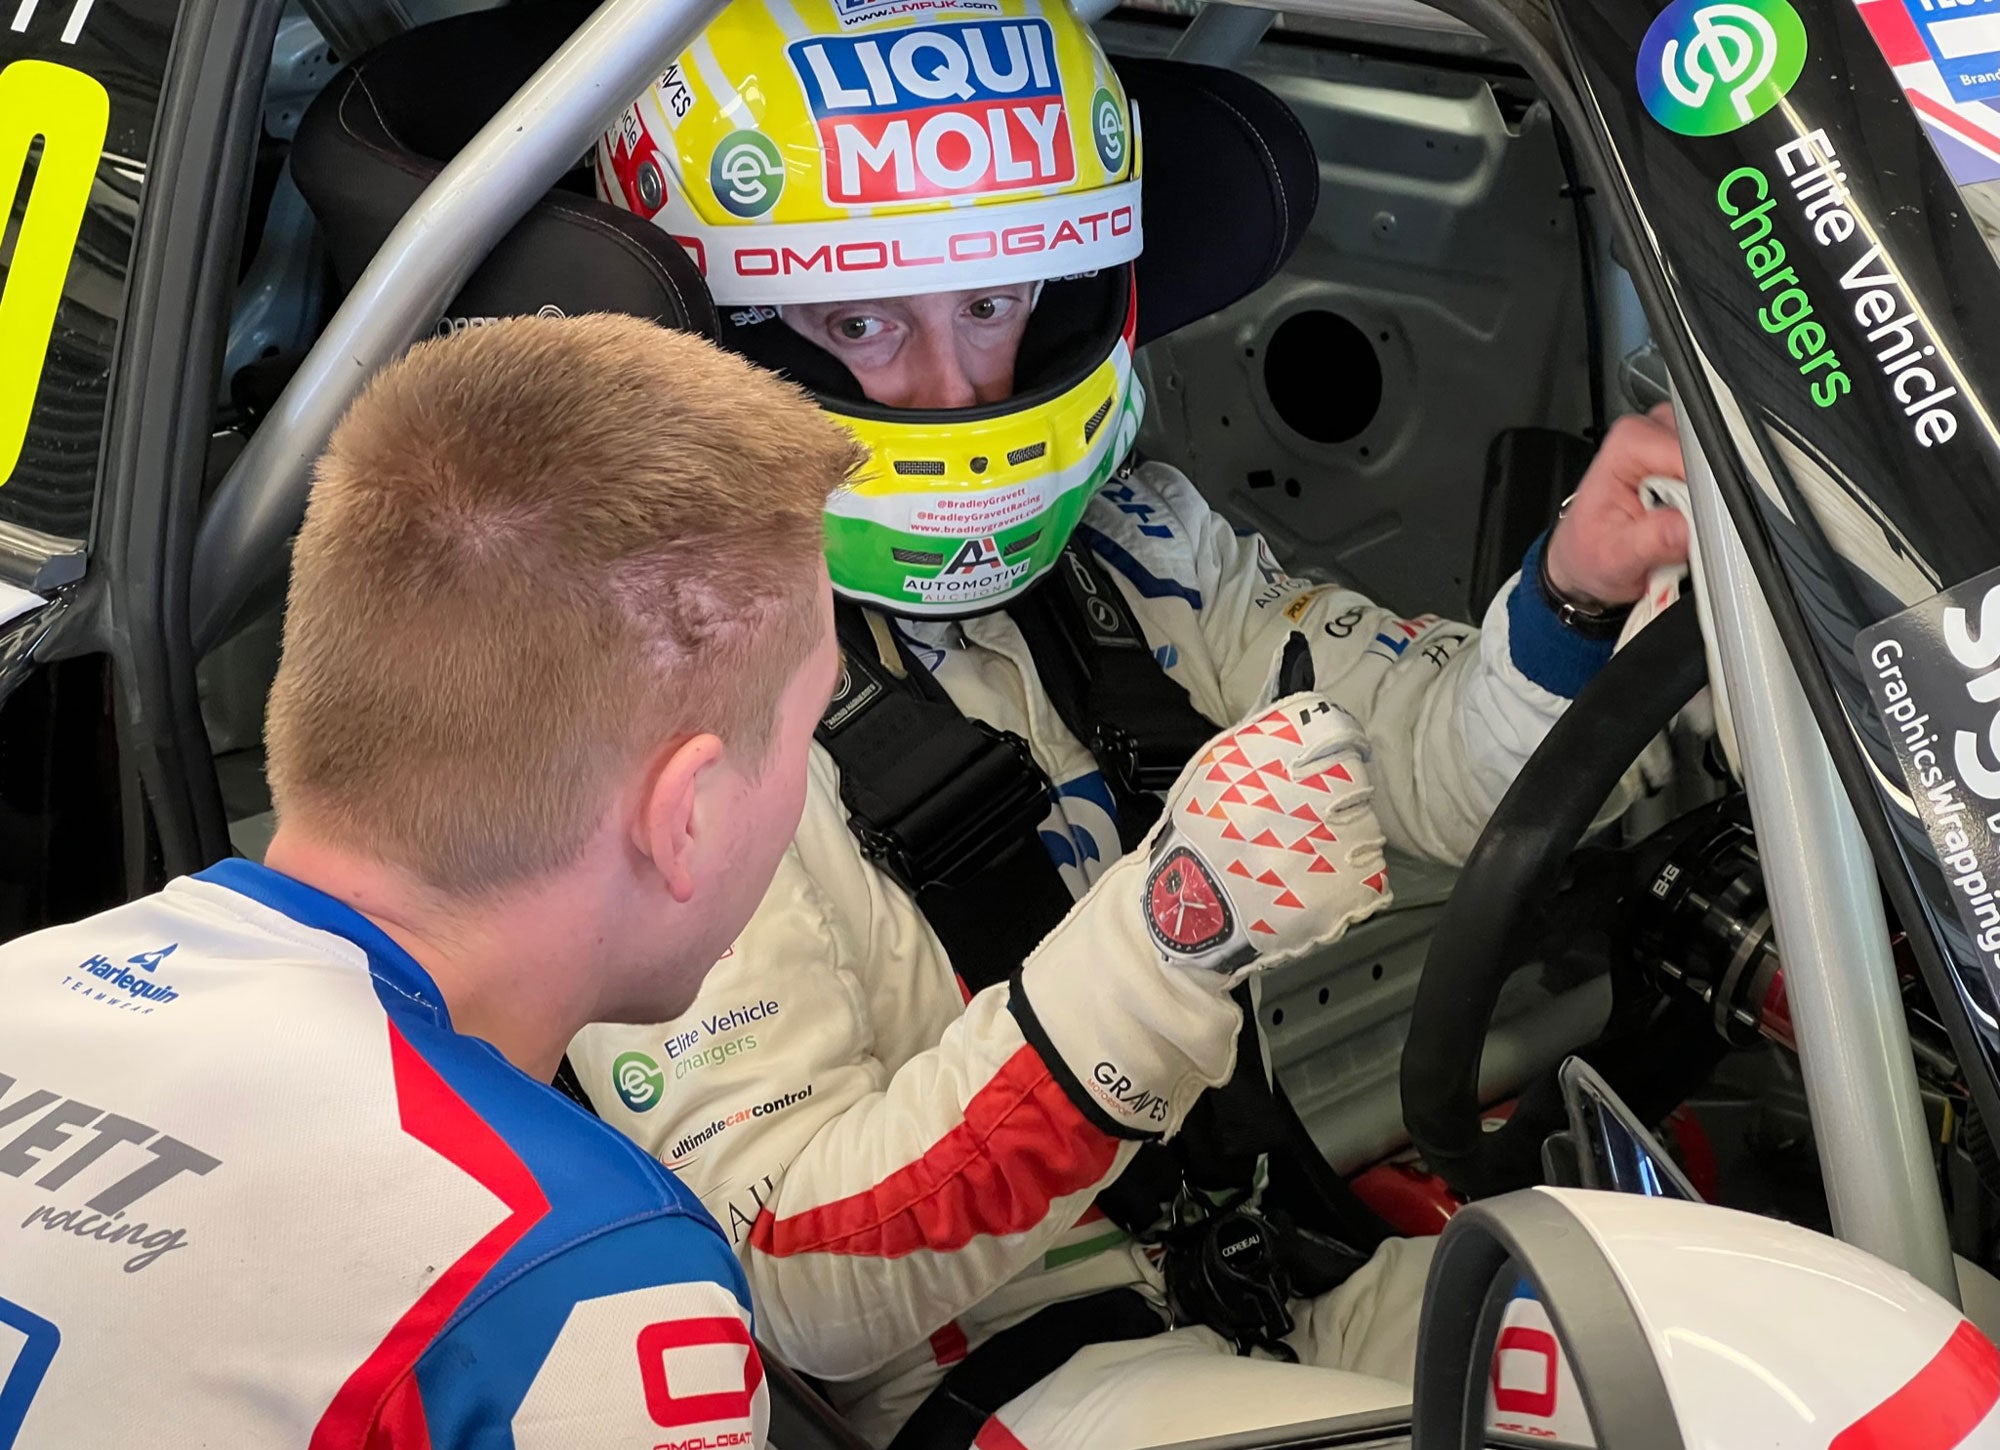 Bradley Gravett son of BTCC British Touring Car Champion Robb Gravett in the MINI Challenge JCW Series at Silverstone in 2022 Talking to Lewis Perry sat in Race Car Graves Motorsport Cooper Racing Driver LIQUI MOLY LM Performance Thinking it Better